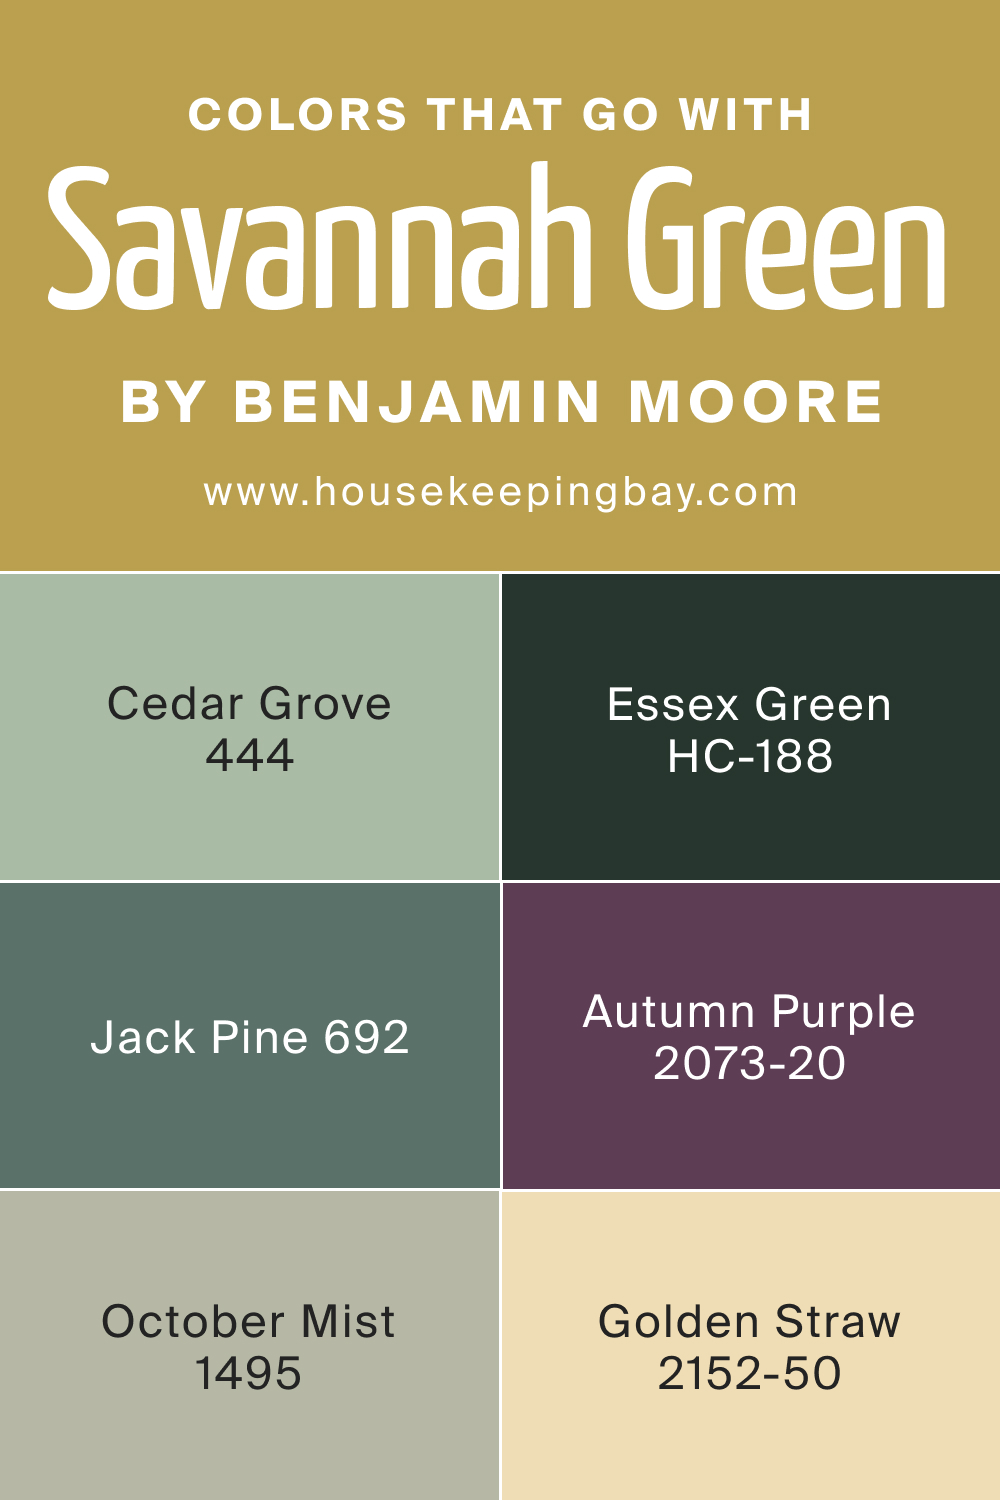 Colors that goes with Savannah Green 2150 30 by Benjamin Moore